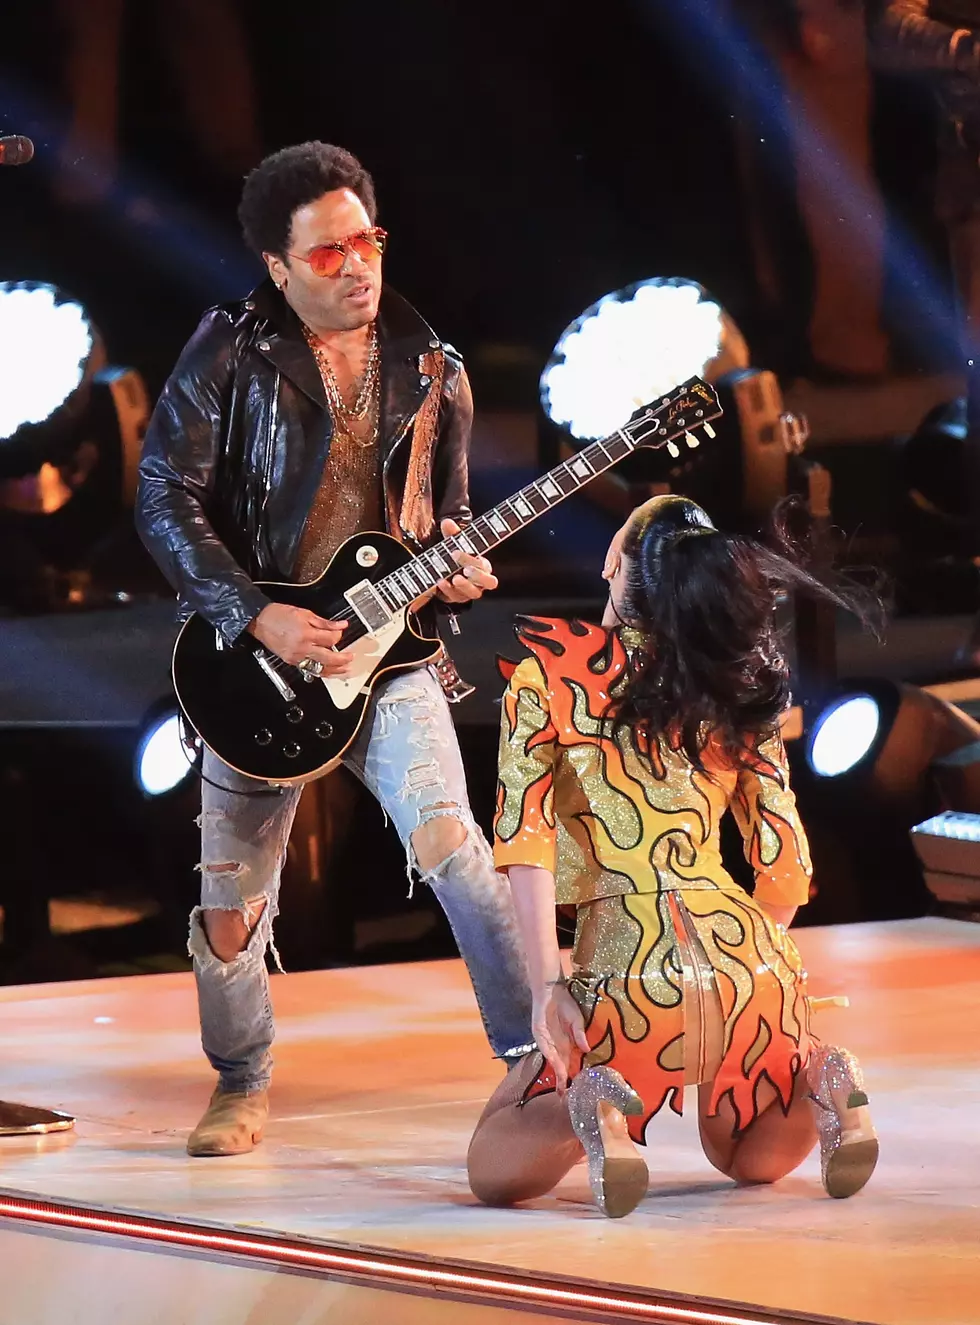 Lenny Kravitz’ Penis Hulked Out of His Pants During a Guitar Solo! NSFW